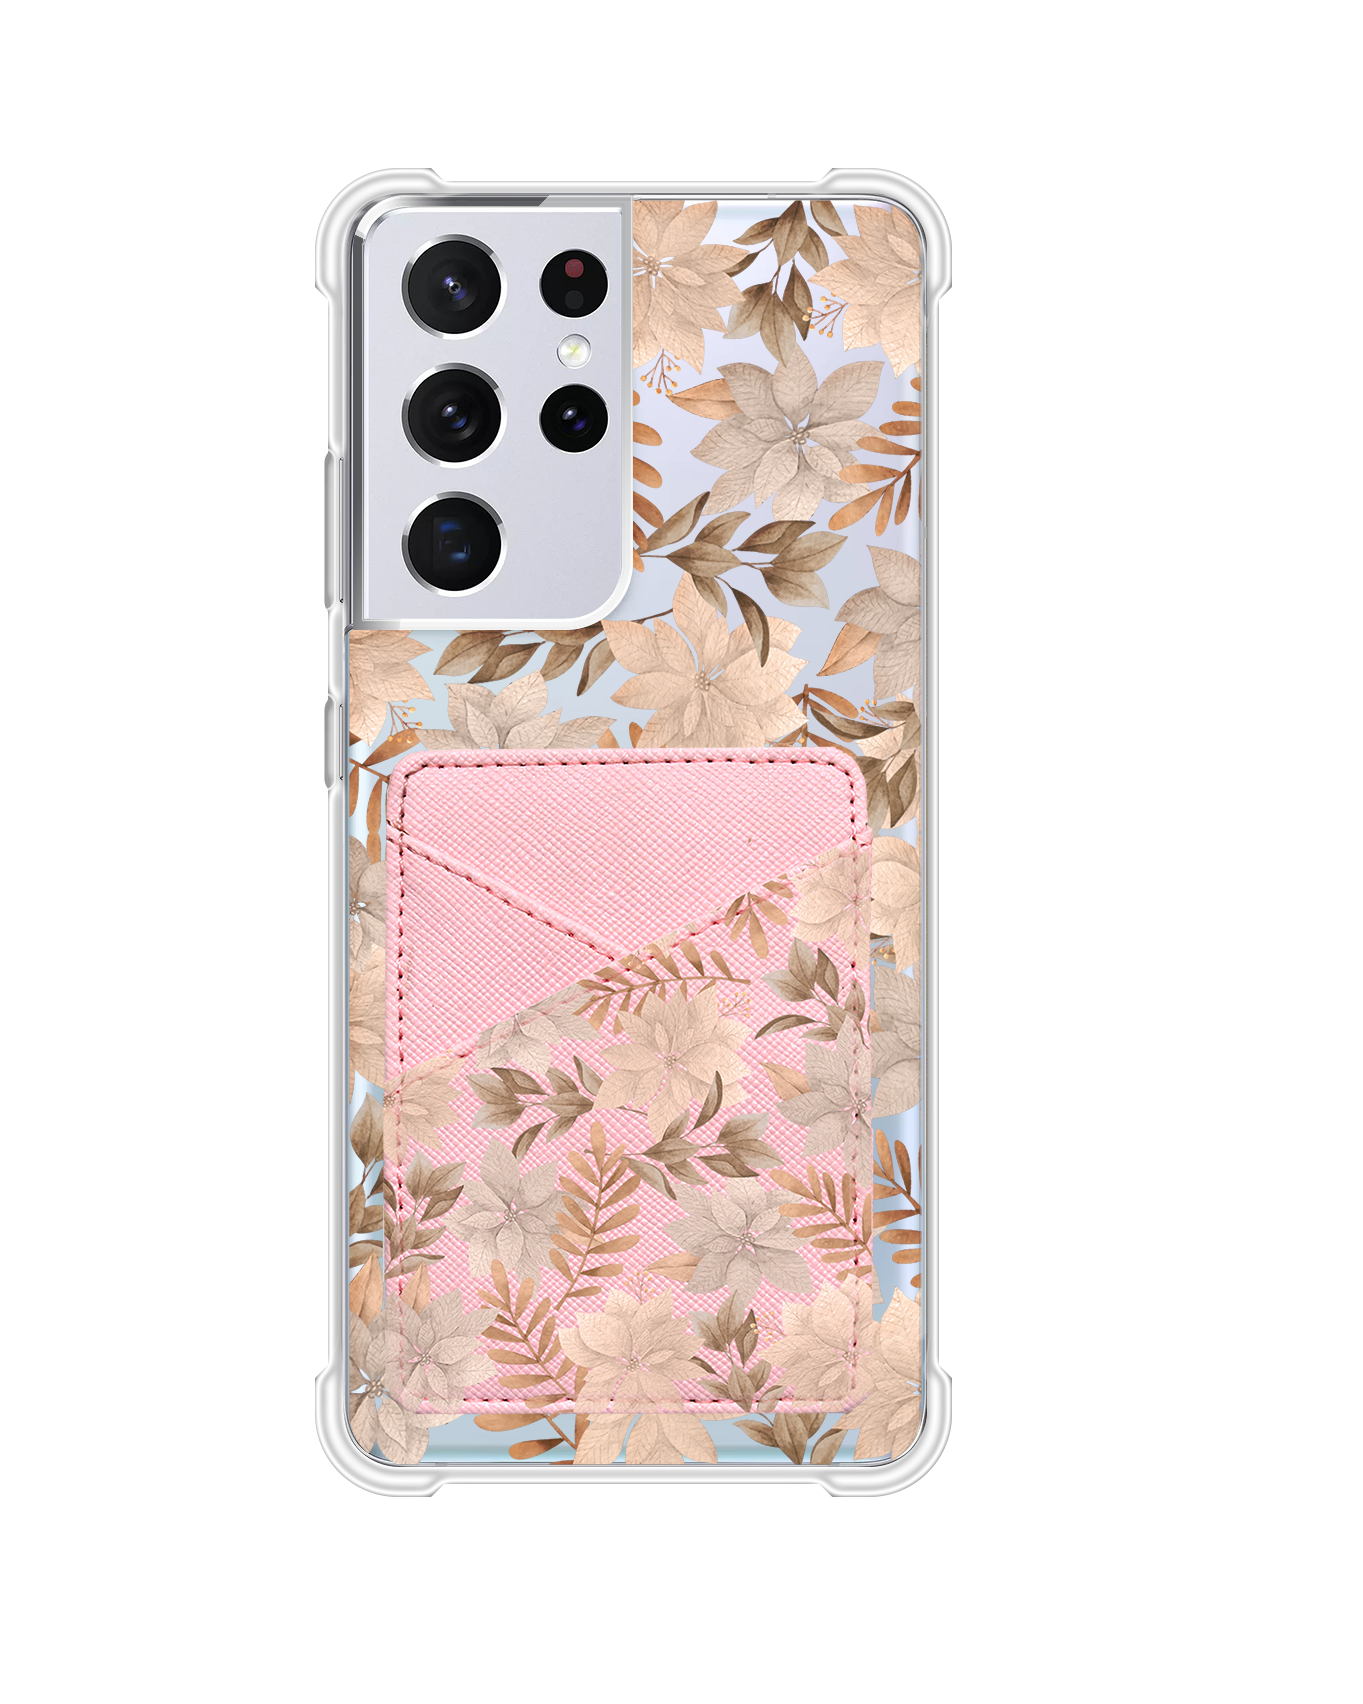 Android Phone Wallet Case - Rustic Lily